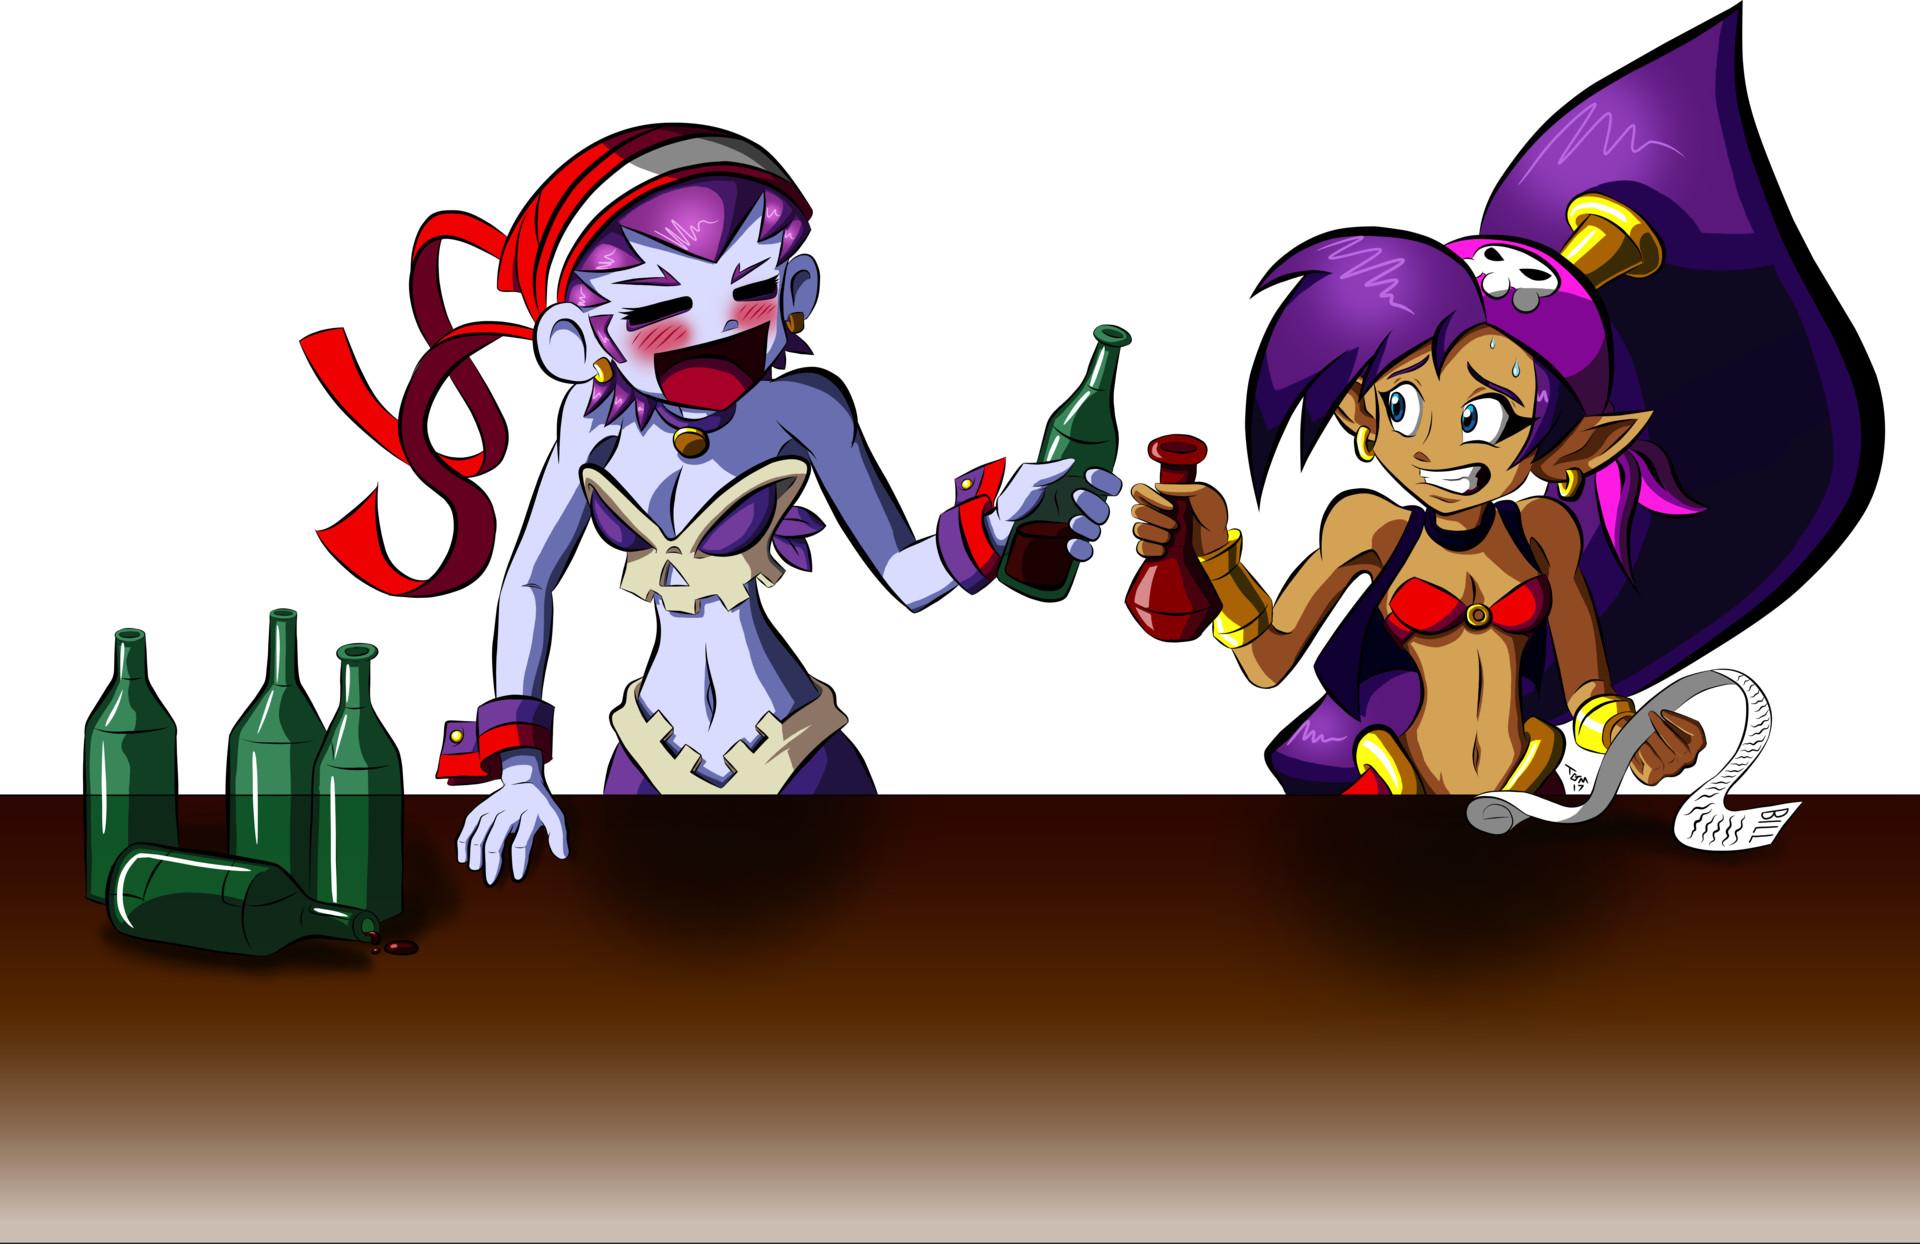 I always wondered, what if during their travels, Shantae and Risky stopped ...